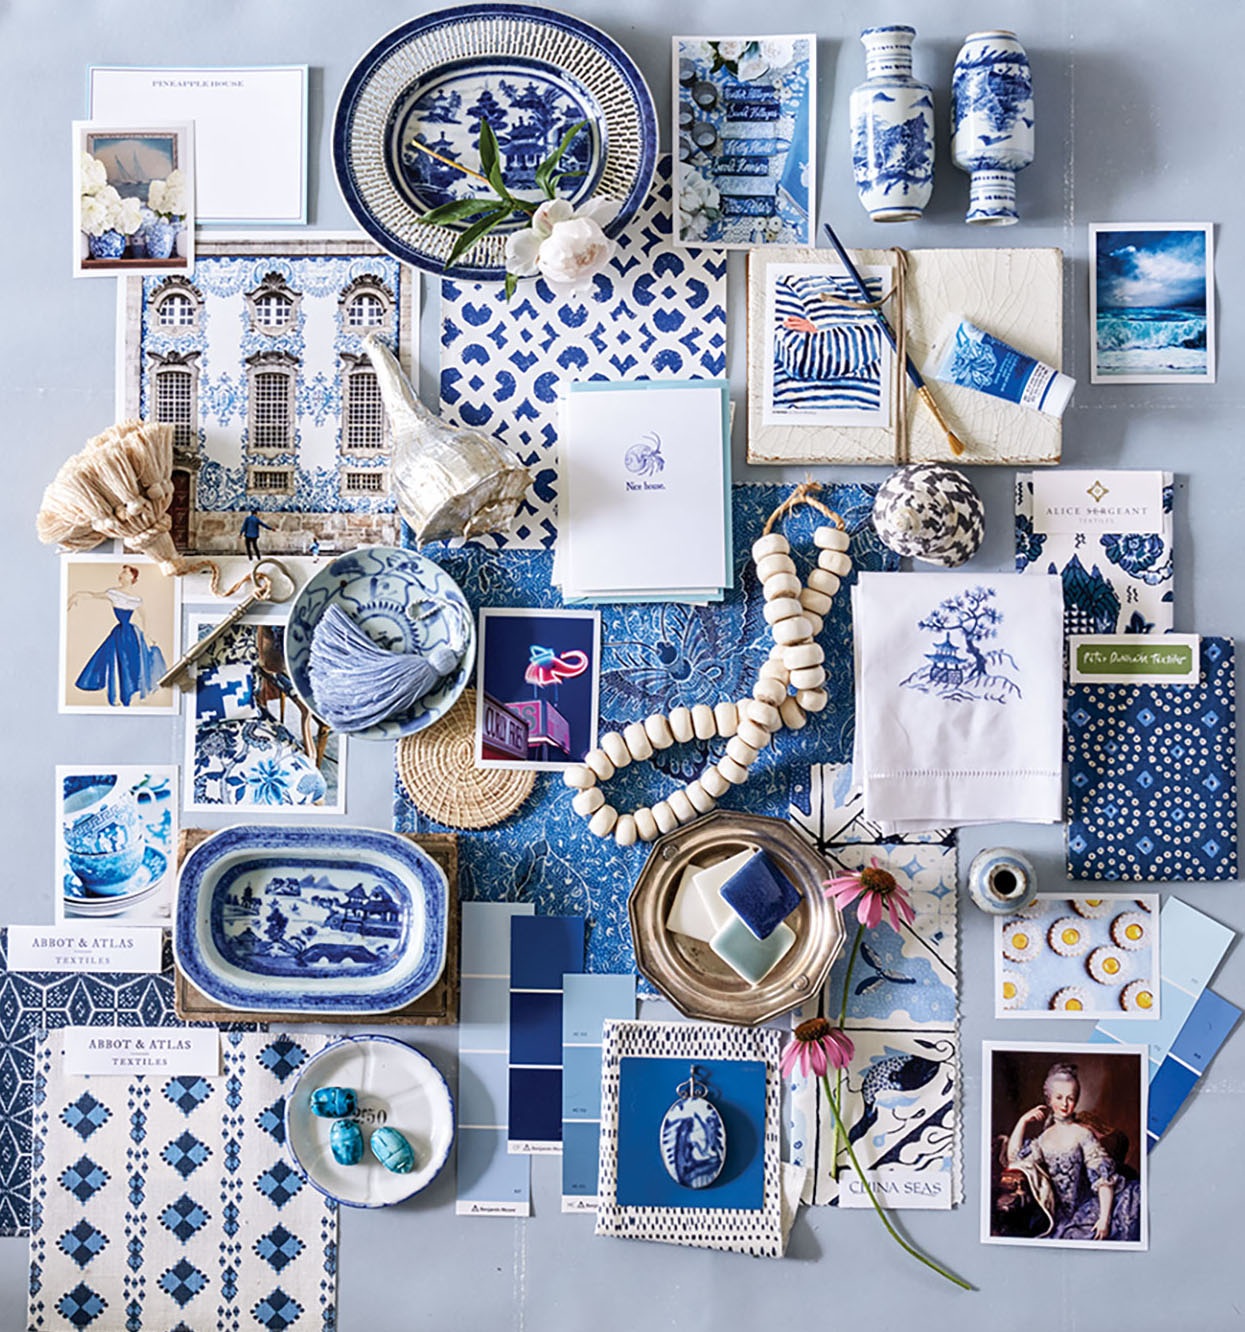 A collage of blue-and-white, including china pieces, wallpaper, paint swatches, textile swatches, jewelry, llnens, and inspration photos